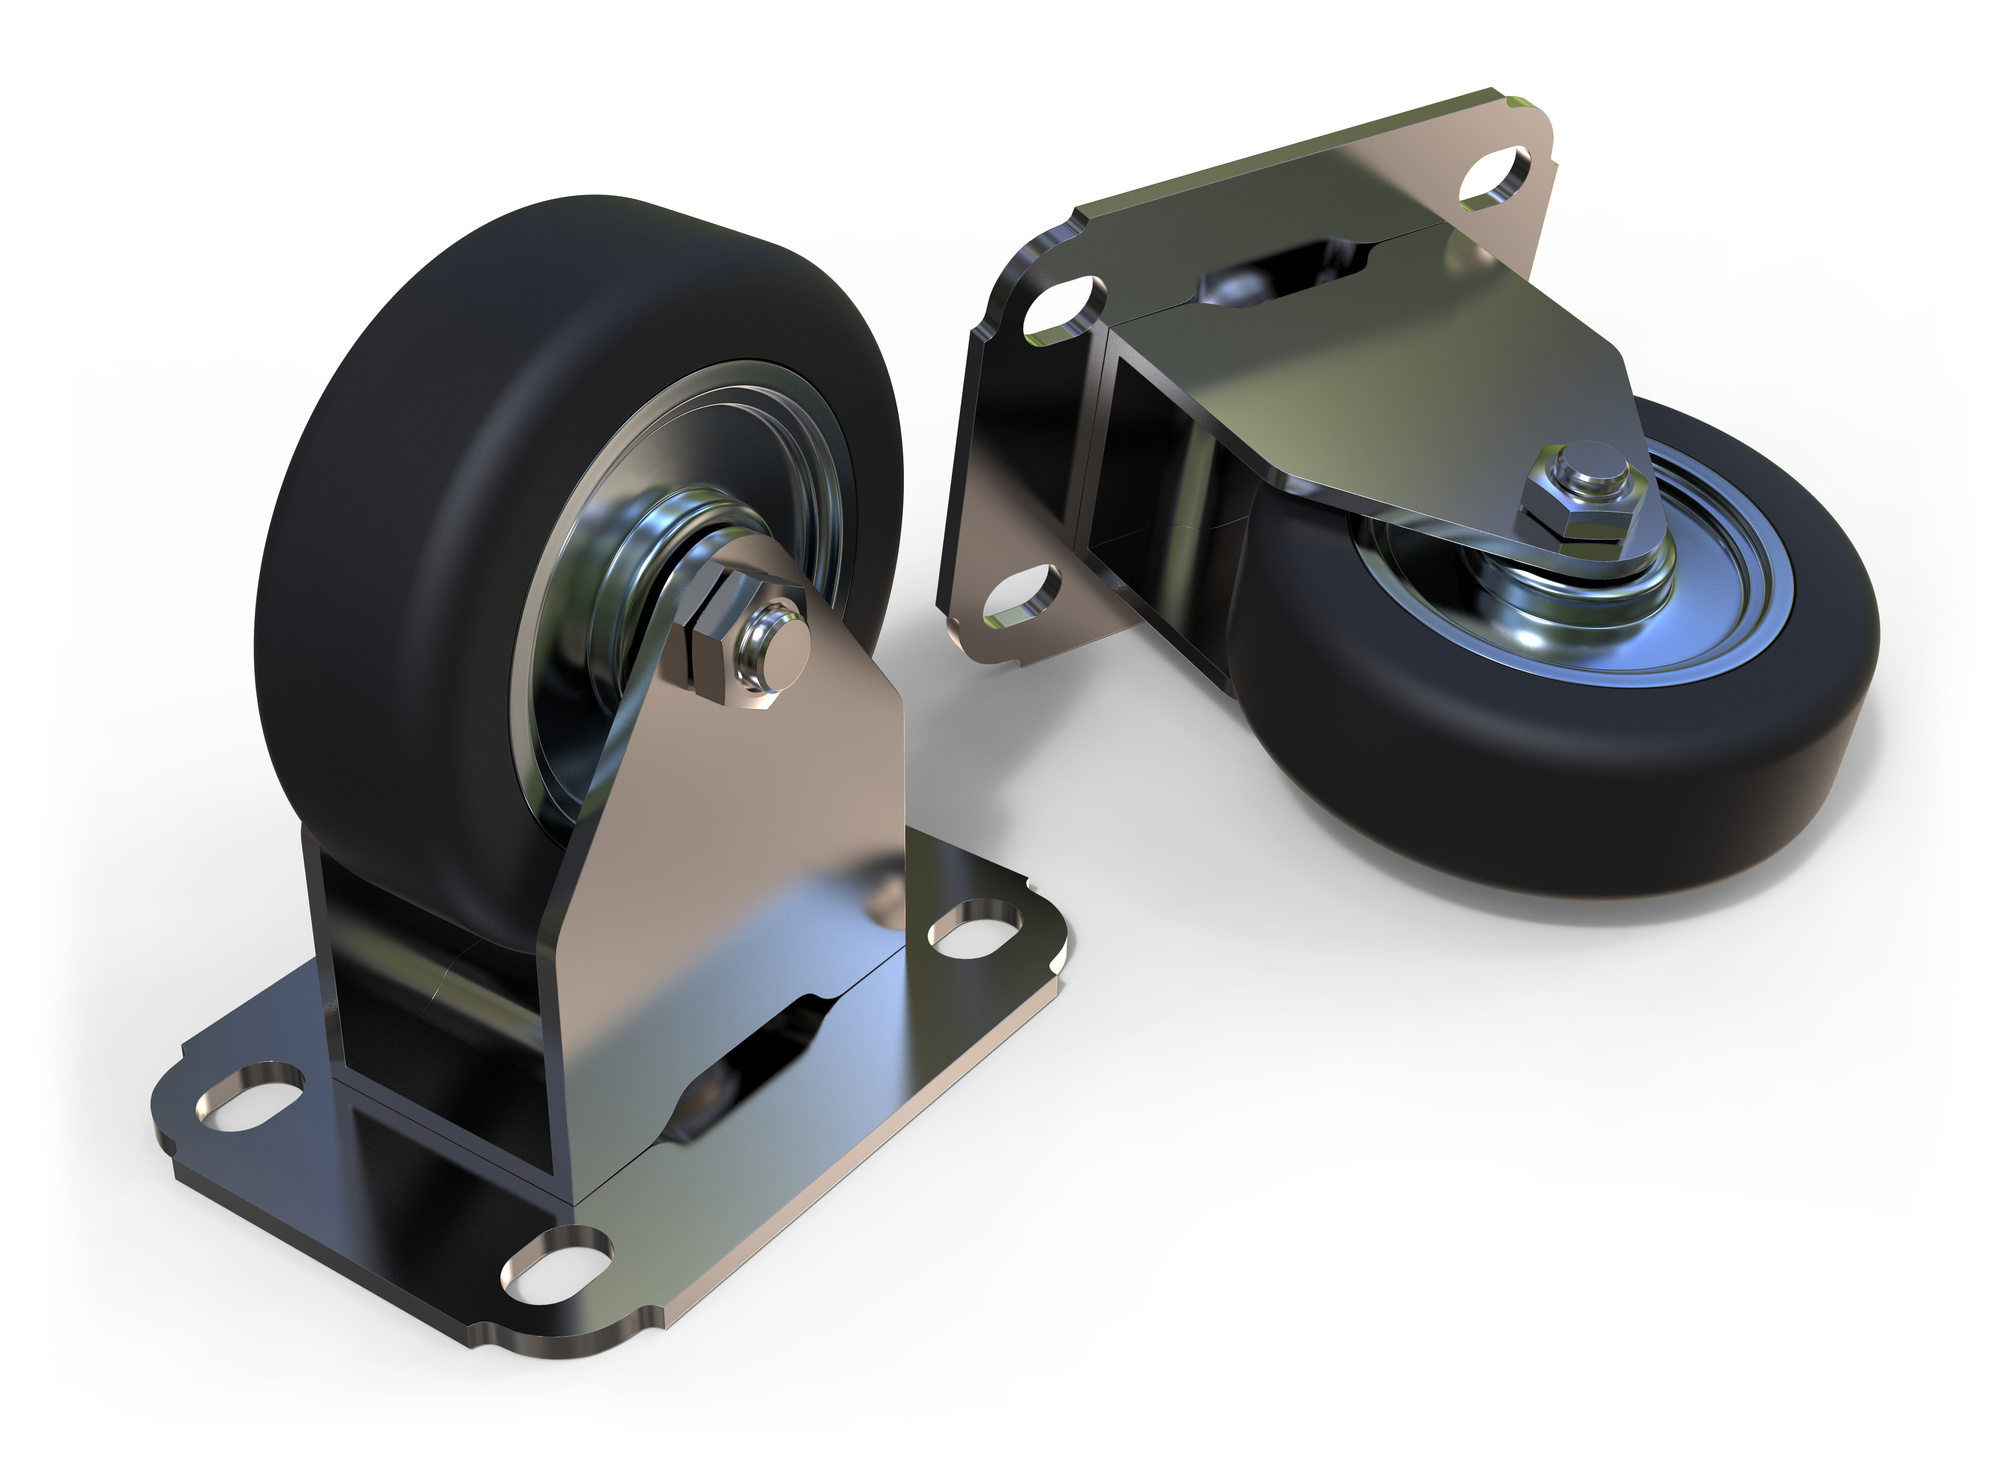 Rigid Casters Vs Swivel Casters: Know The Difference | Hevi Haul